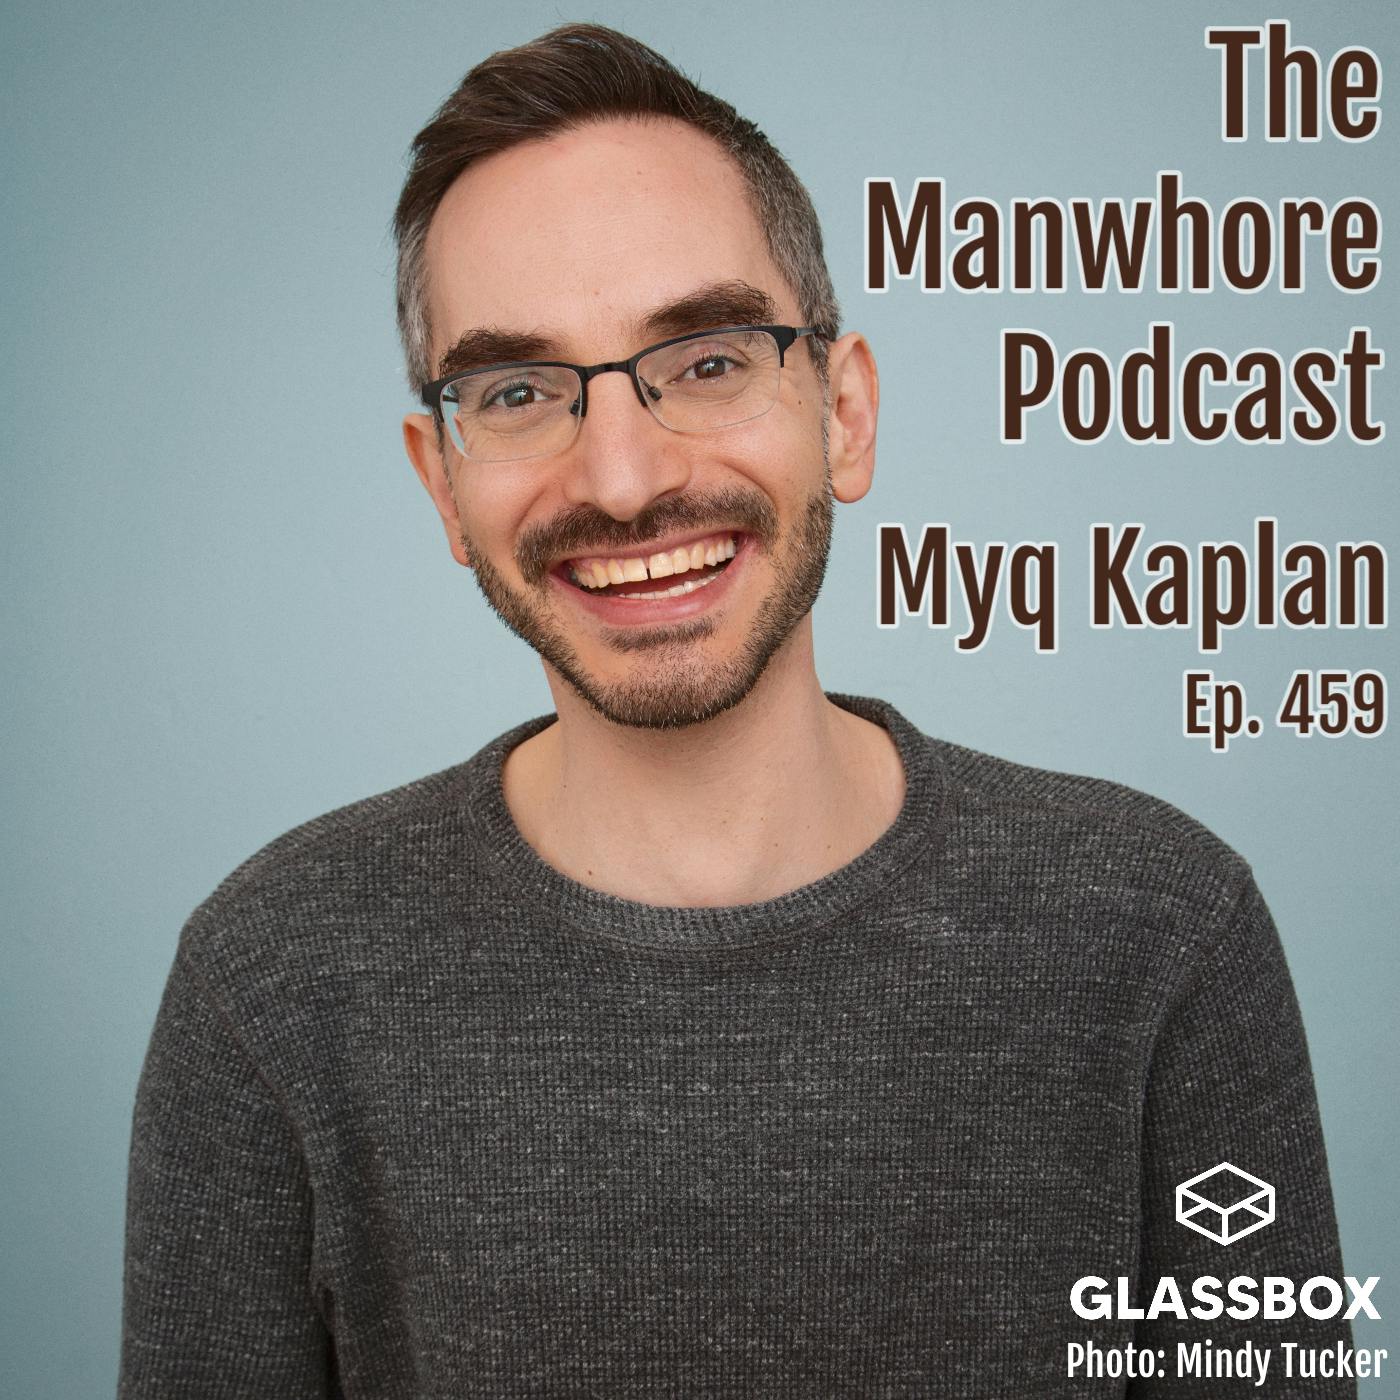 The Manwhore Podcast: A Sex-Positive Quest - Ep. 459: Love Over Lifestyle with Myq Kaplan